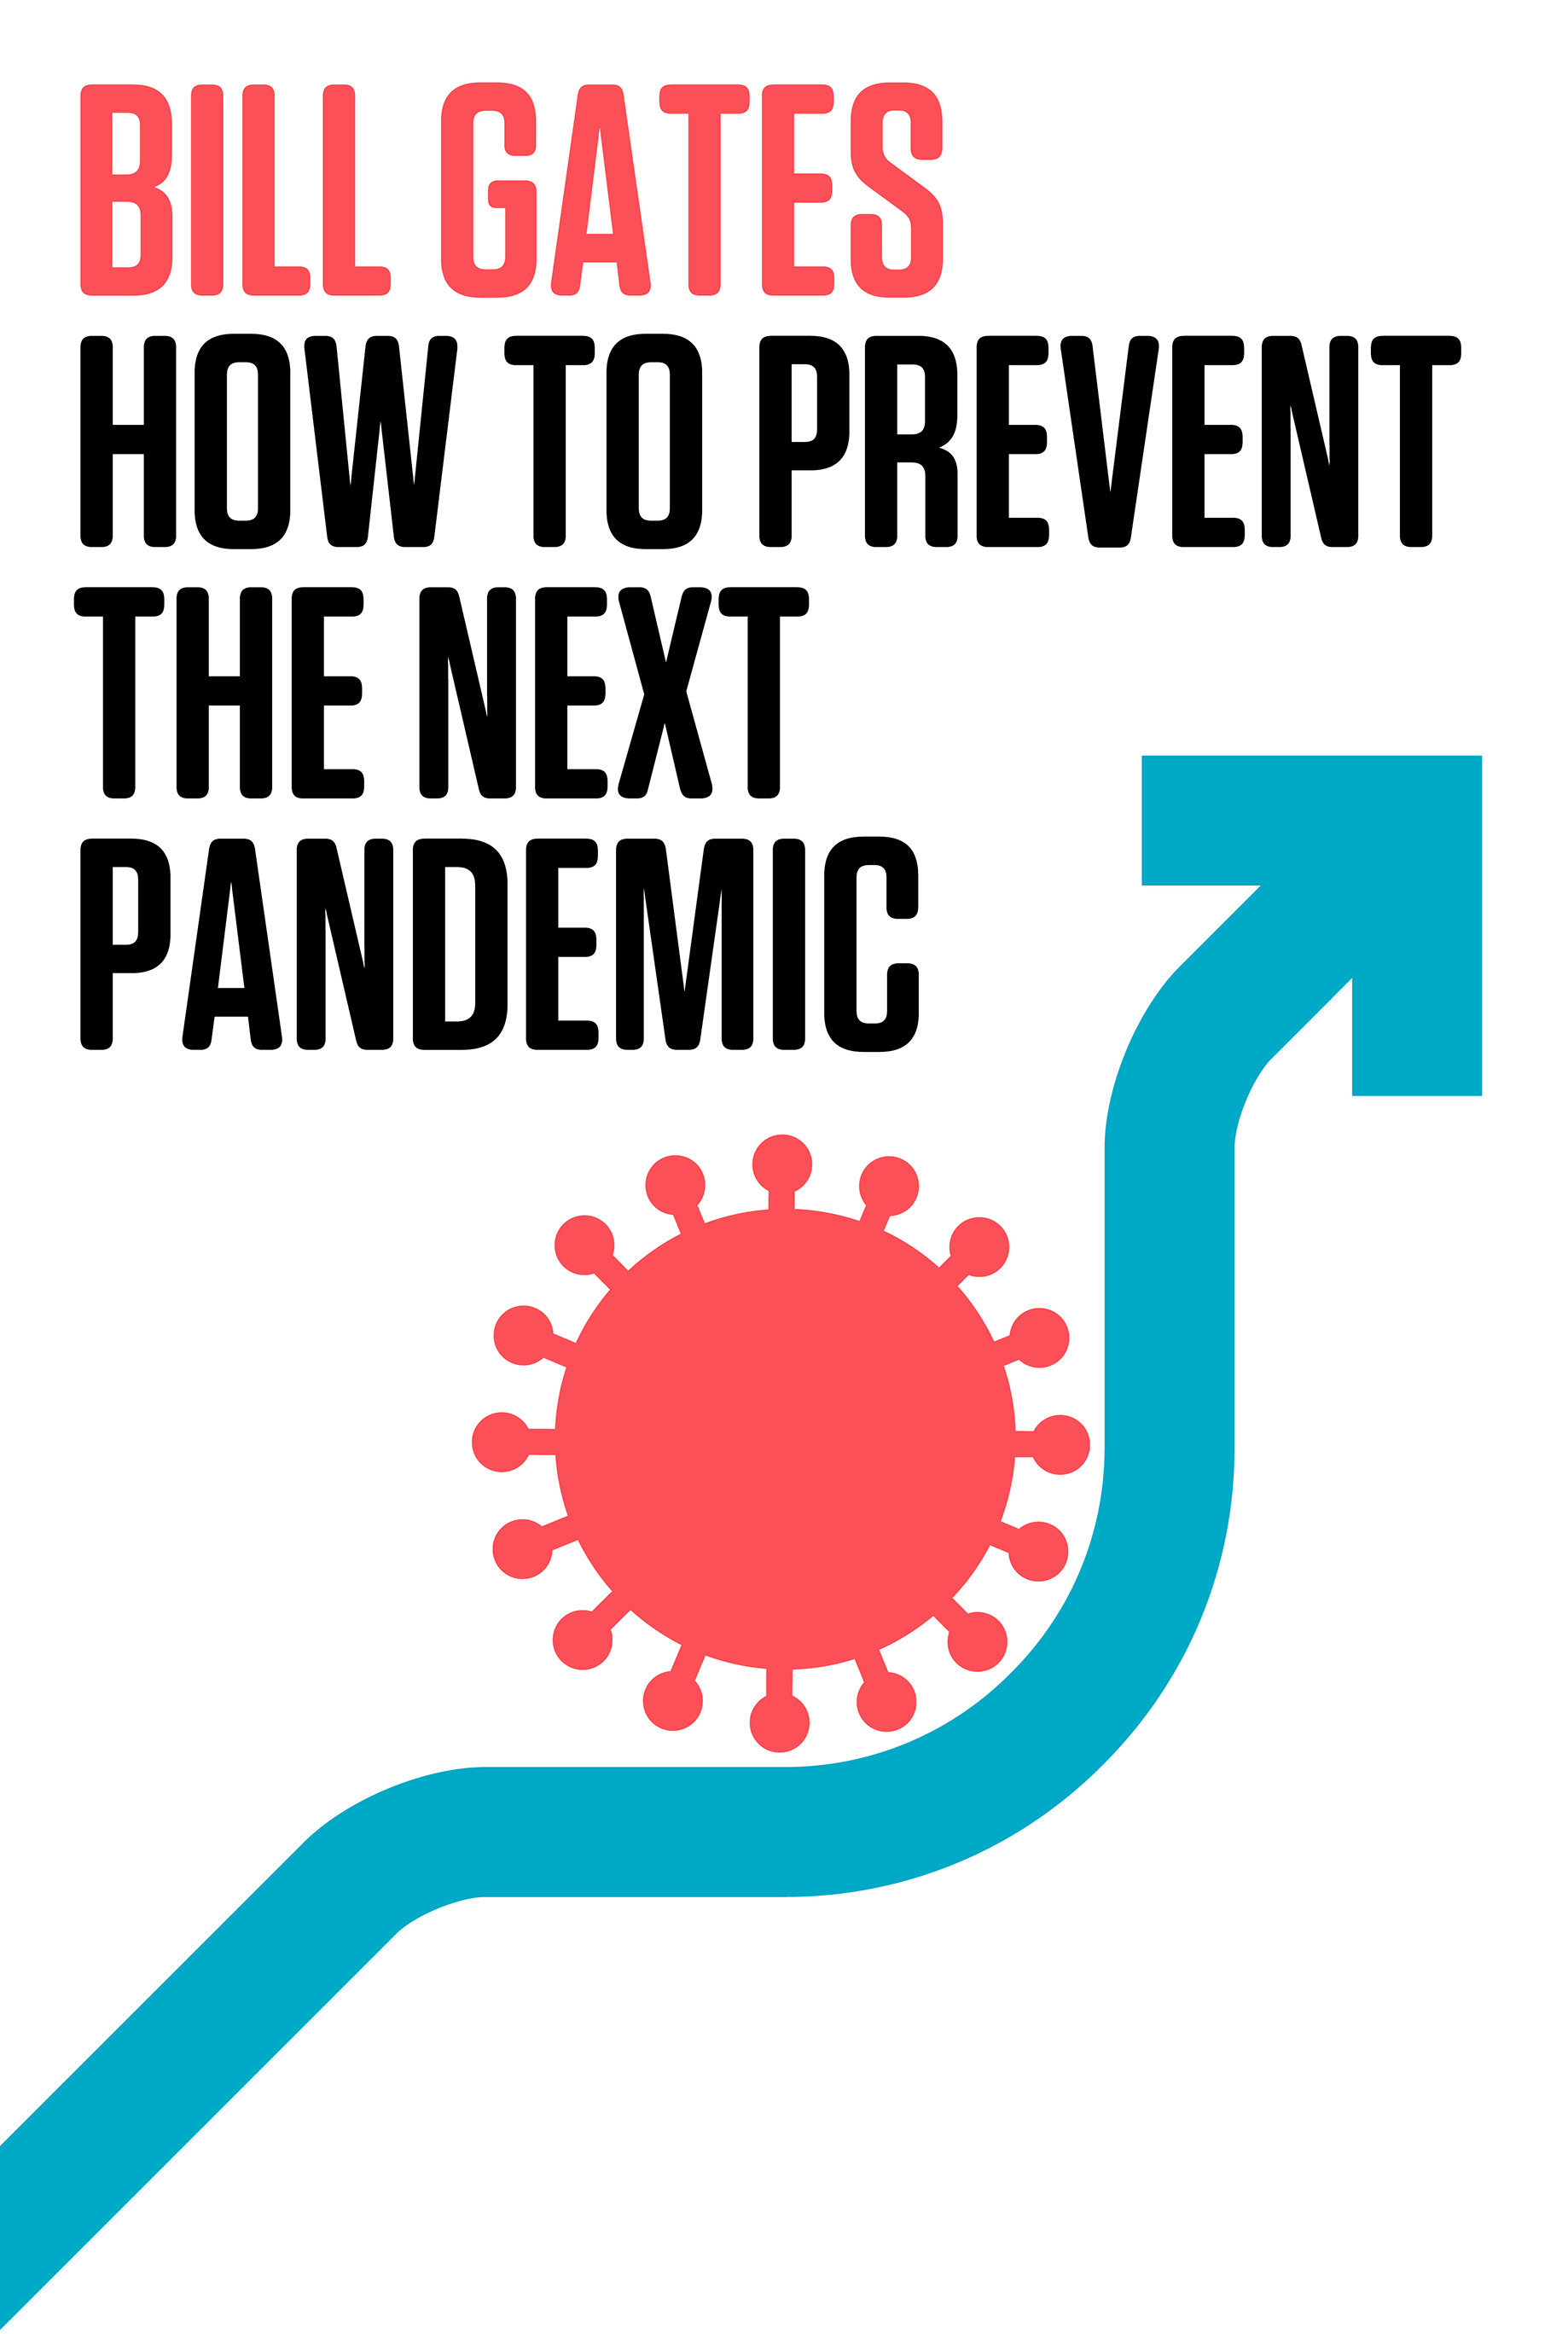 How To Prevent The Next Pandemic (Hardcover Book)